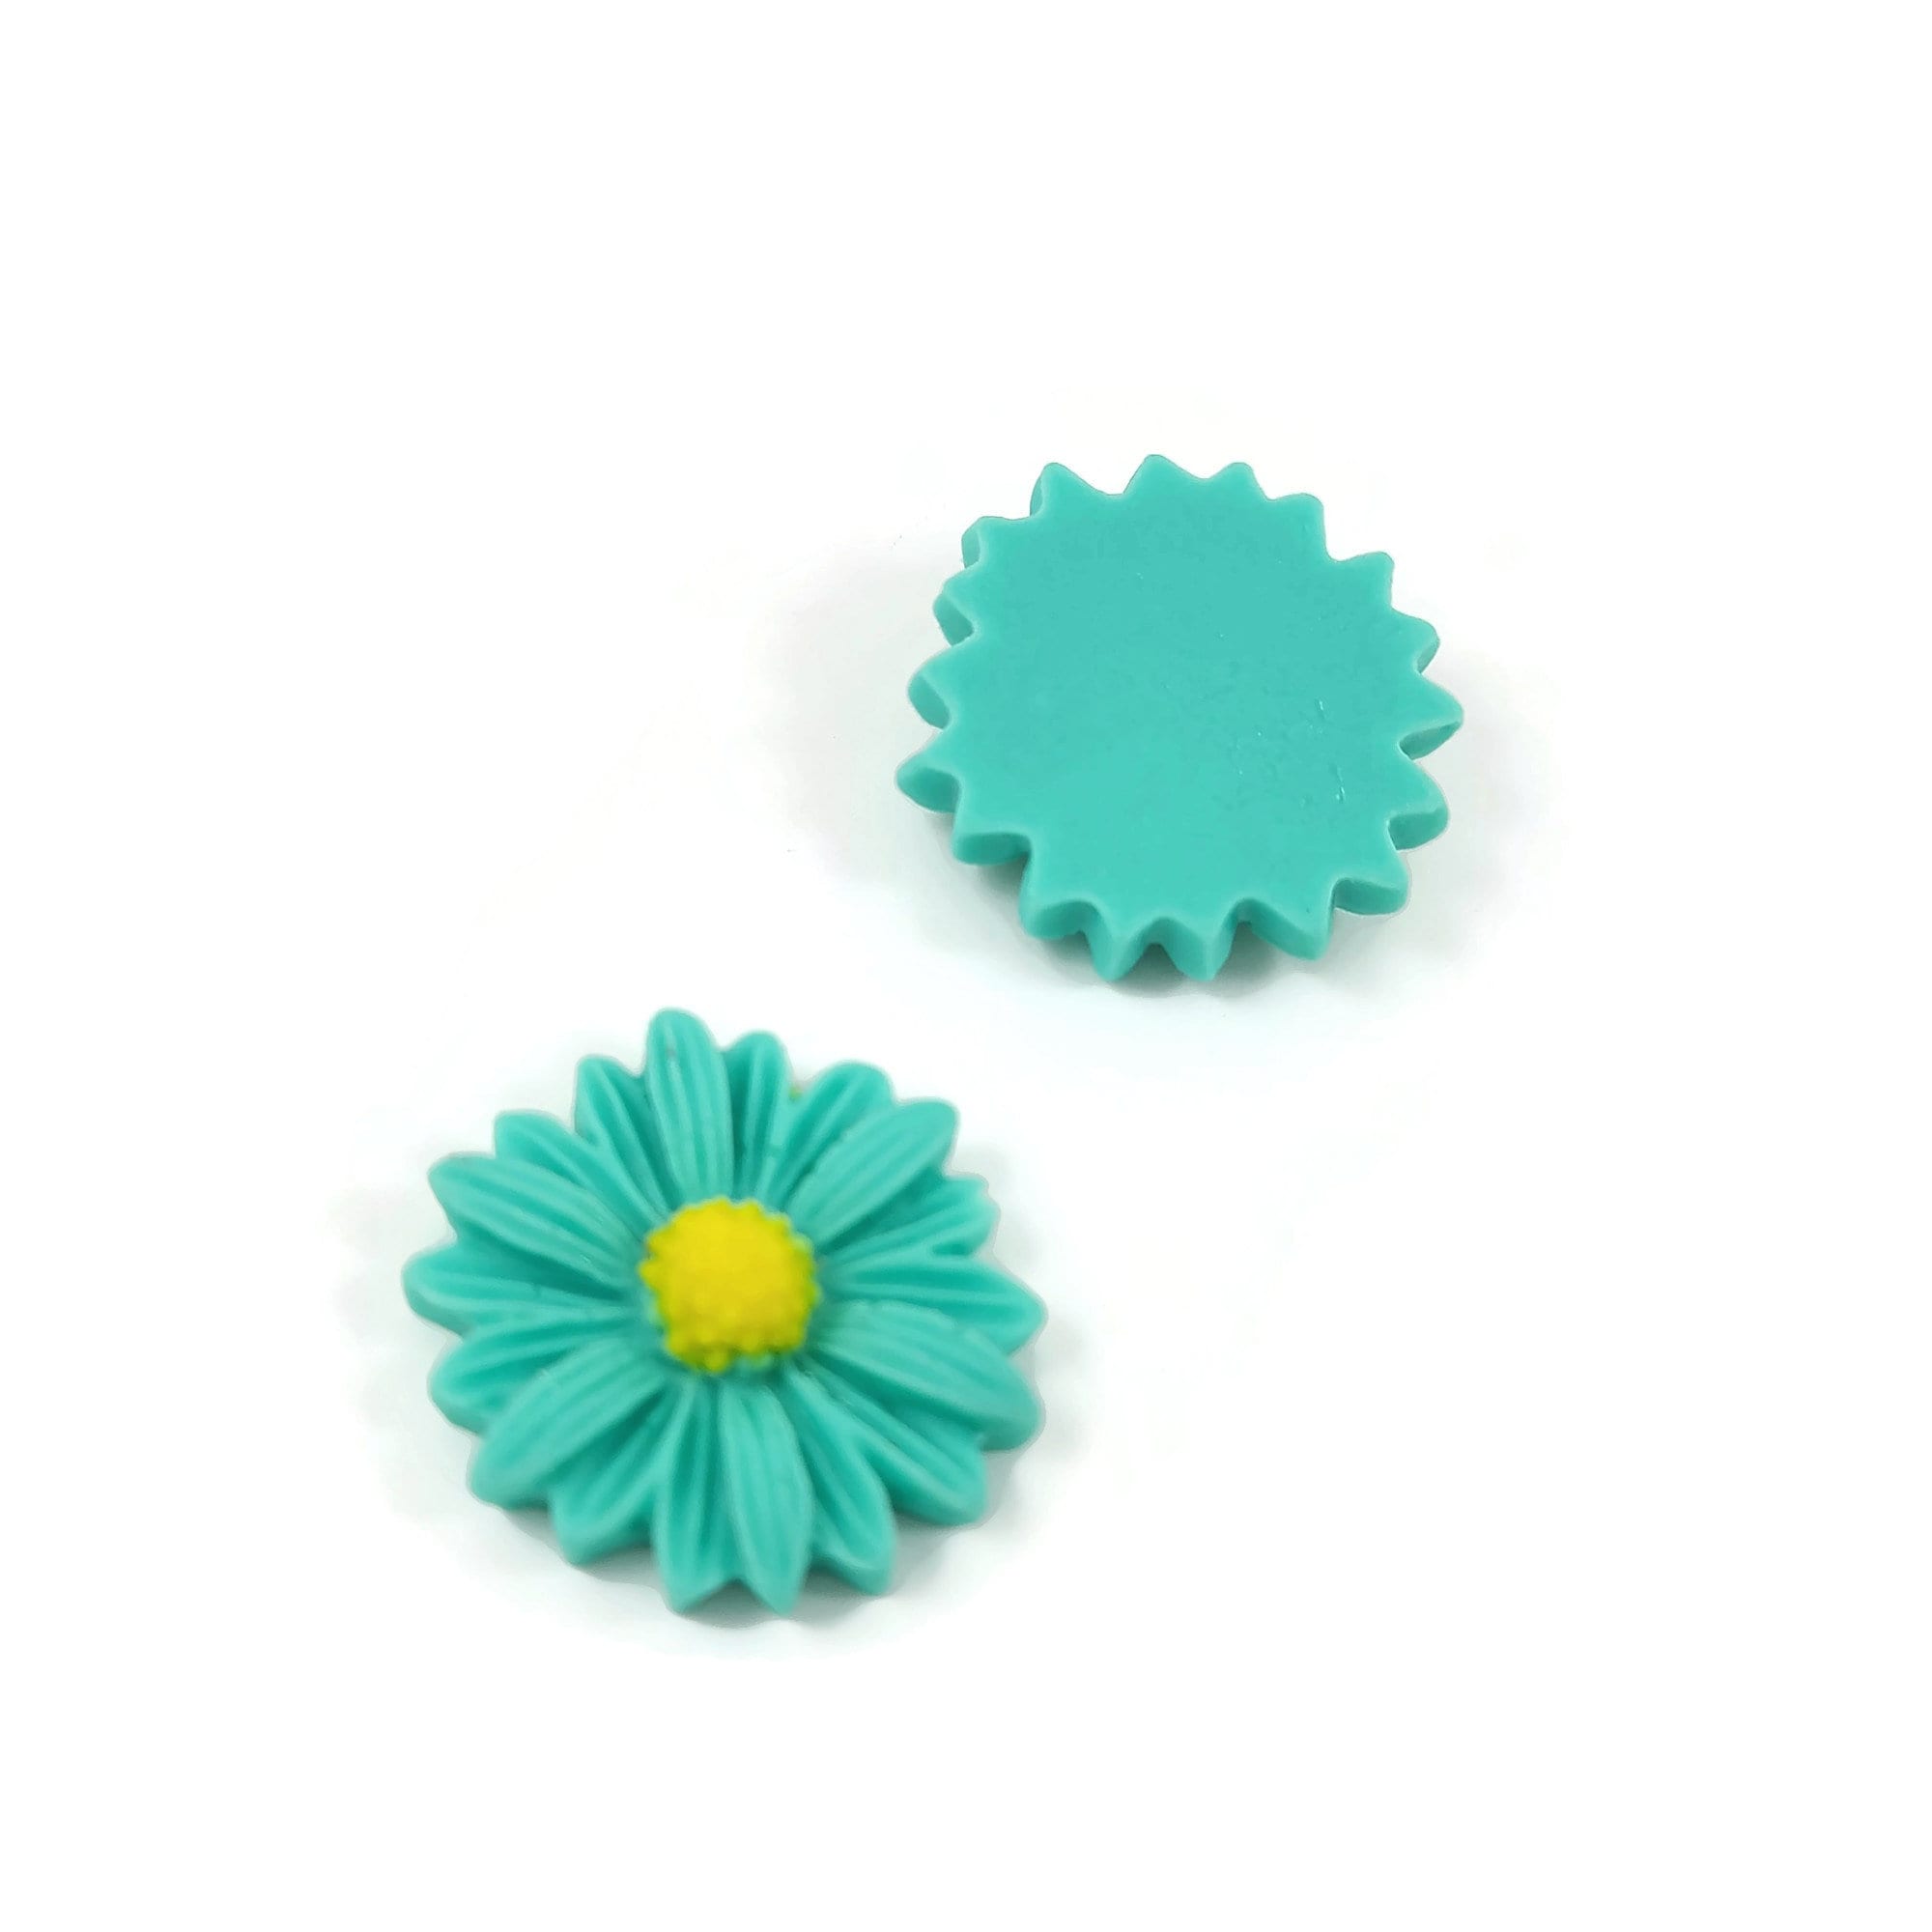 Resin flower cabochons, Mixed daisy embellishments, Flat back cabochons, Assorted pack, Jewelry making supplies